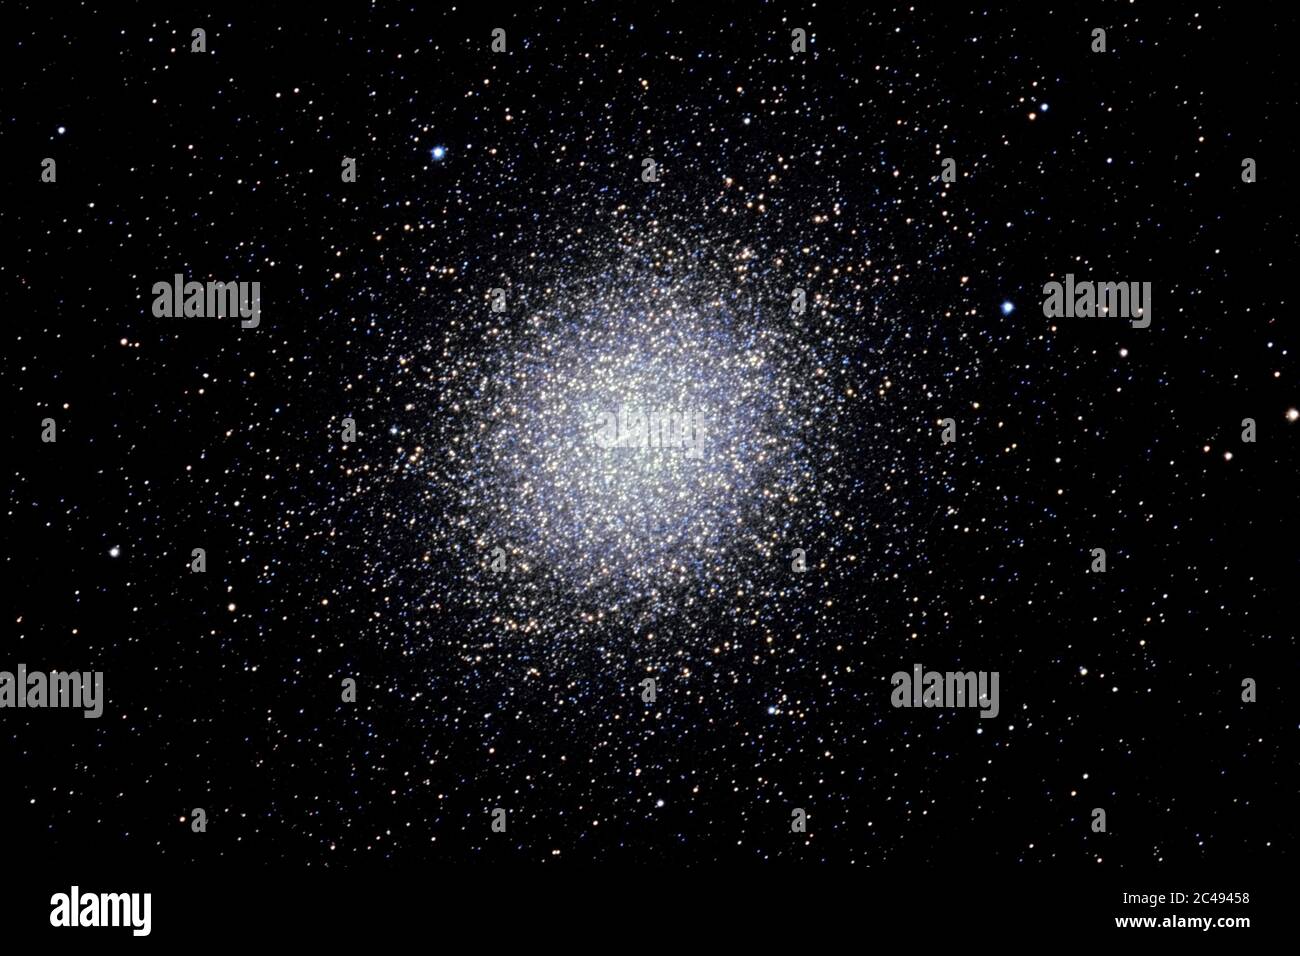 Several million stars form the brightest and largest globular cluster known orbiting our galaxy - Omega Centauri (NGC 5139; Caldwell 80). Stock Photo